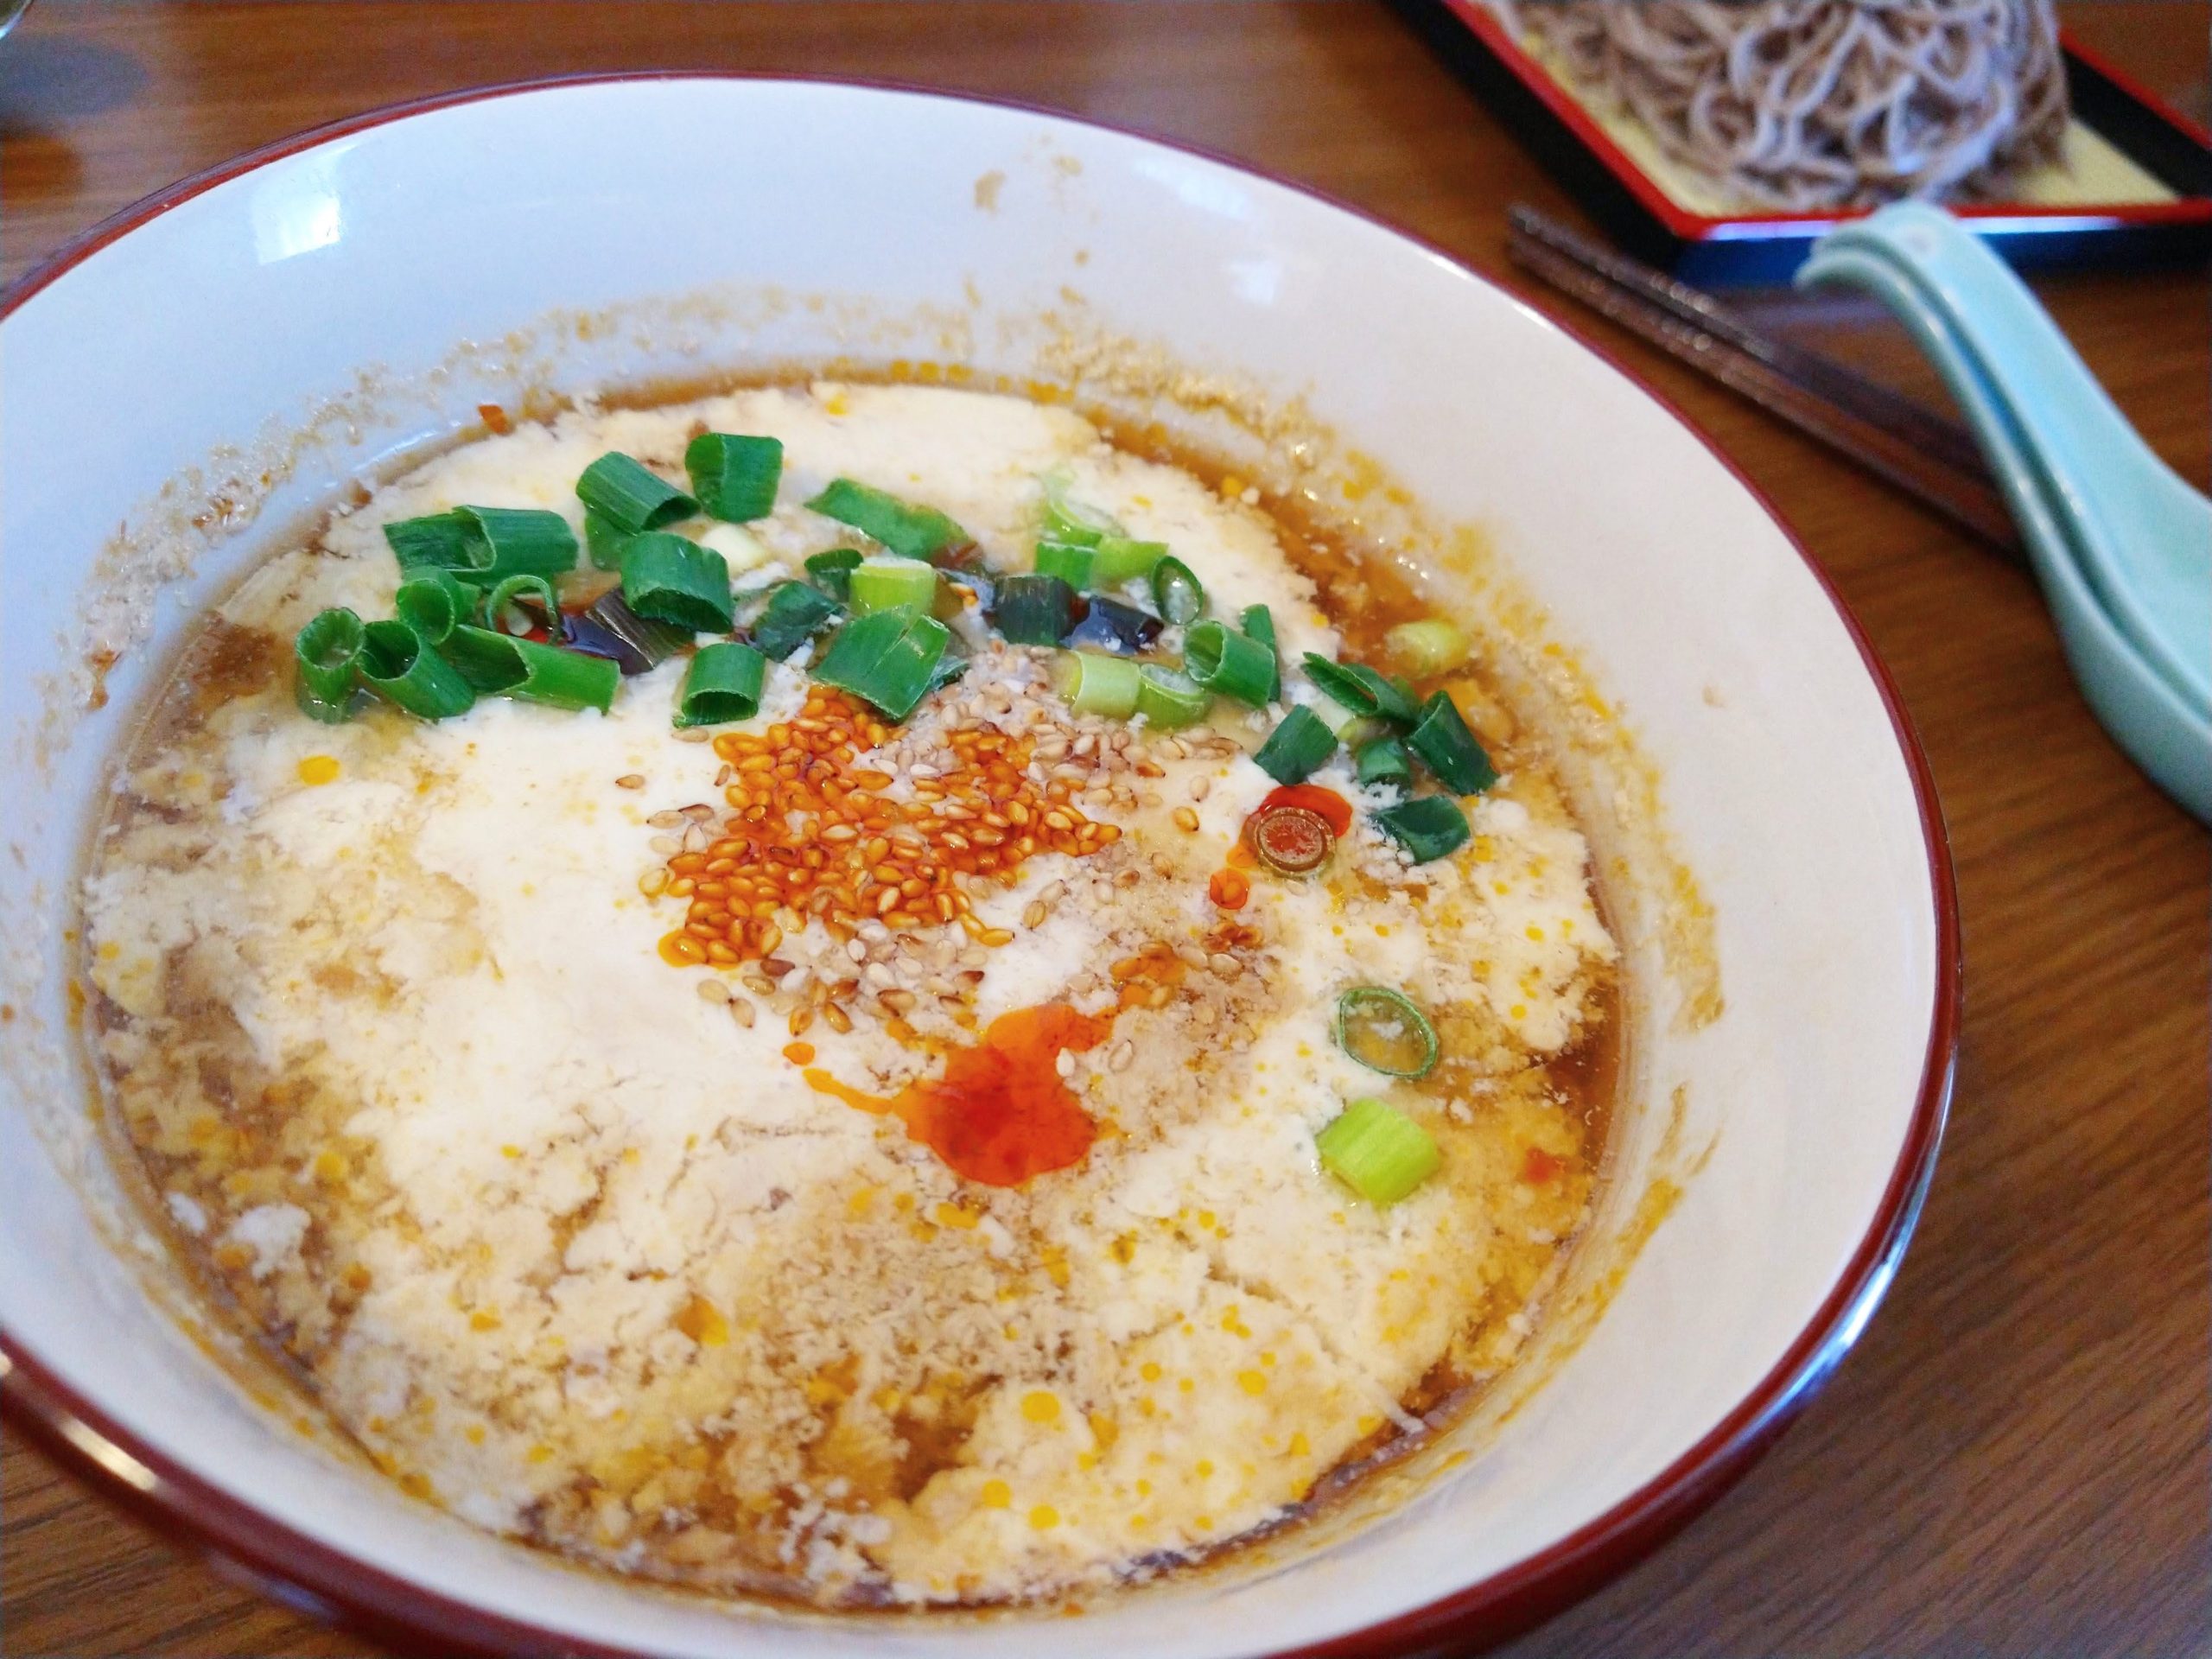 Easy with Microwave! Taiwanese Breakfast, Savory Soy Milk Soup